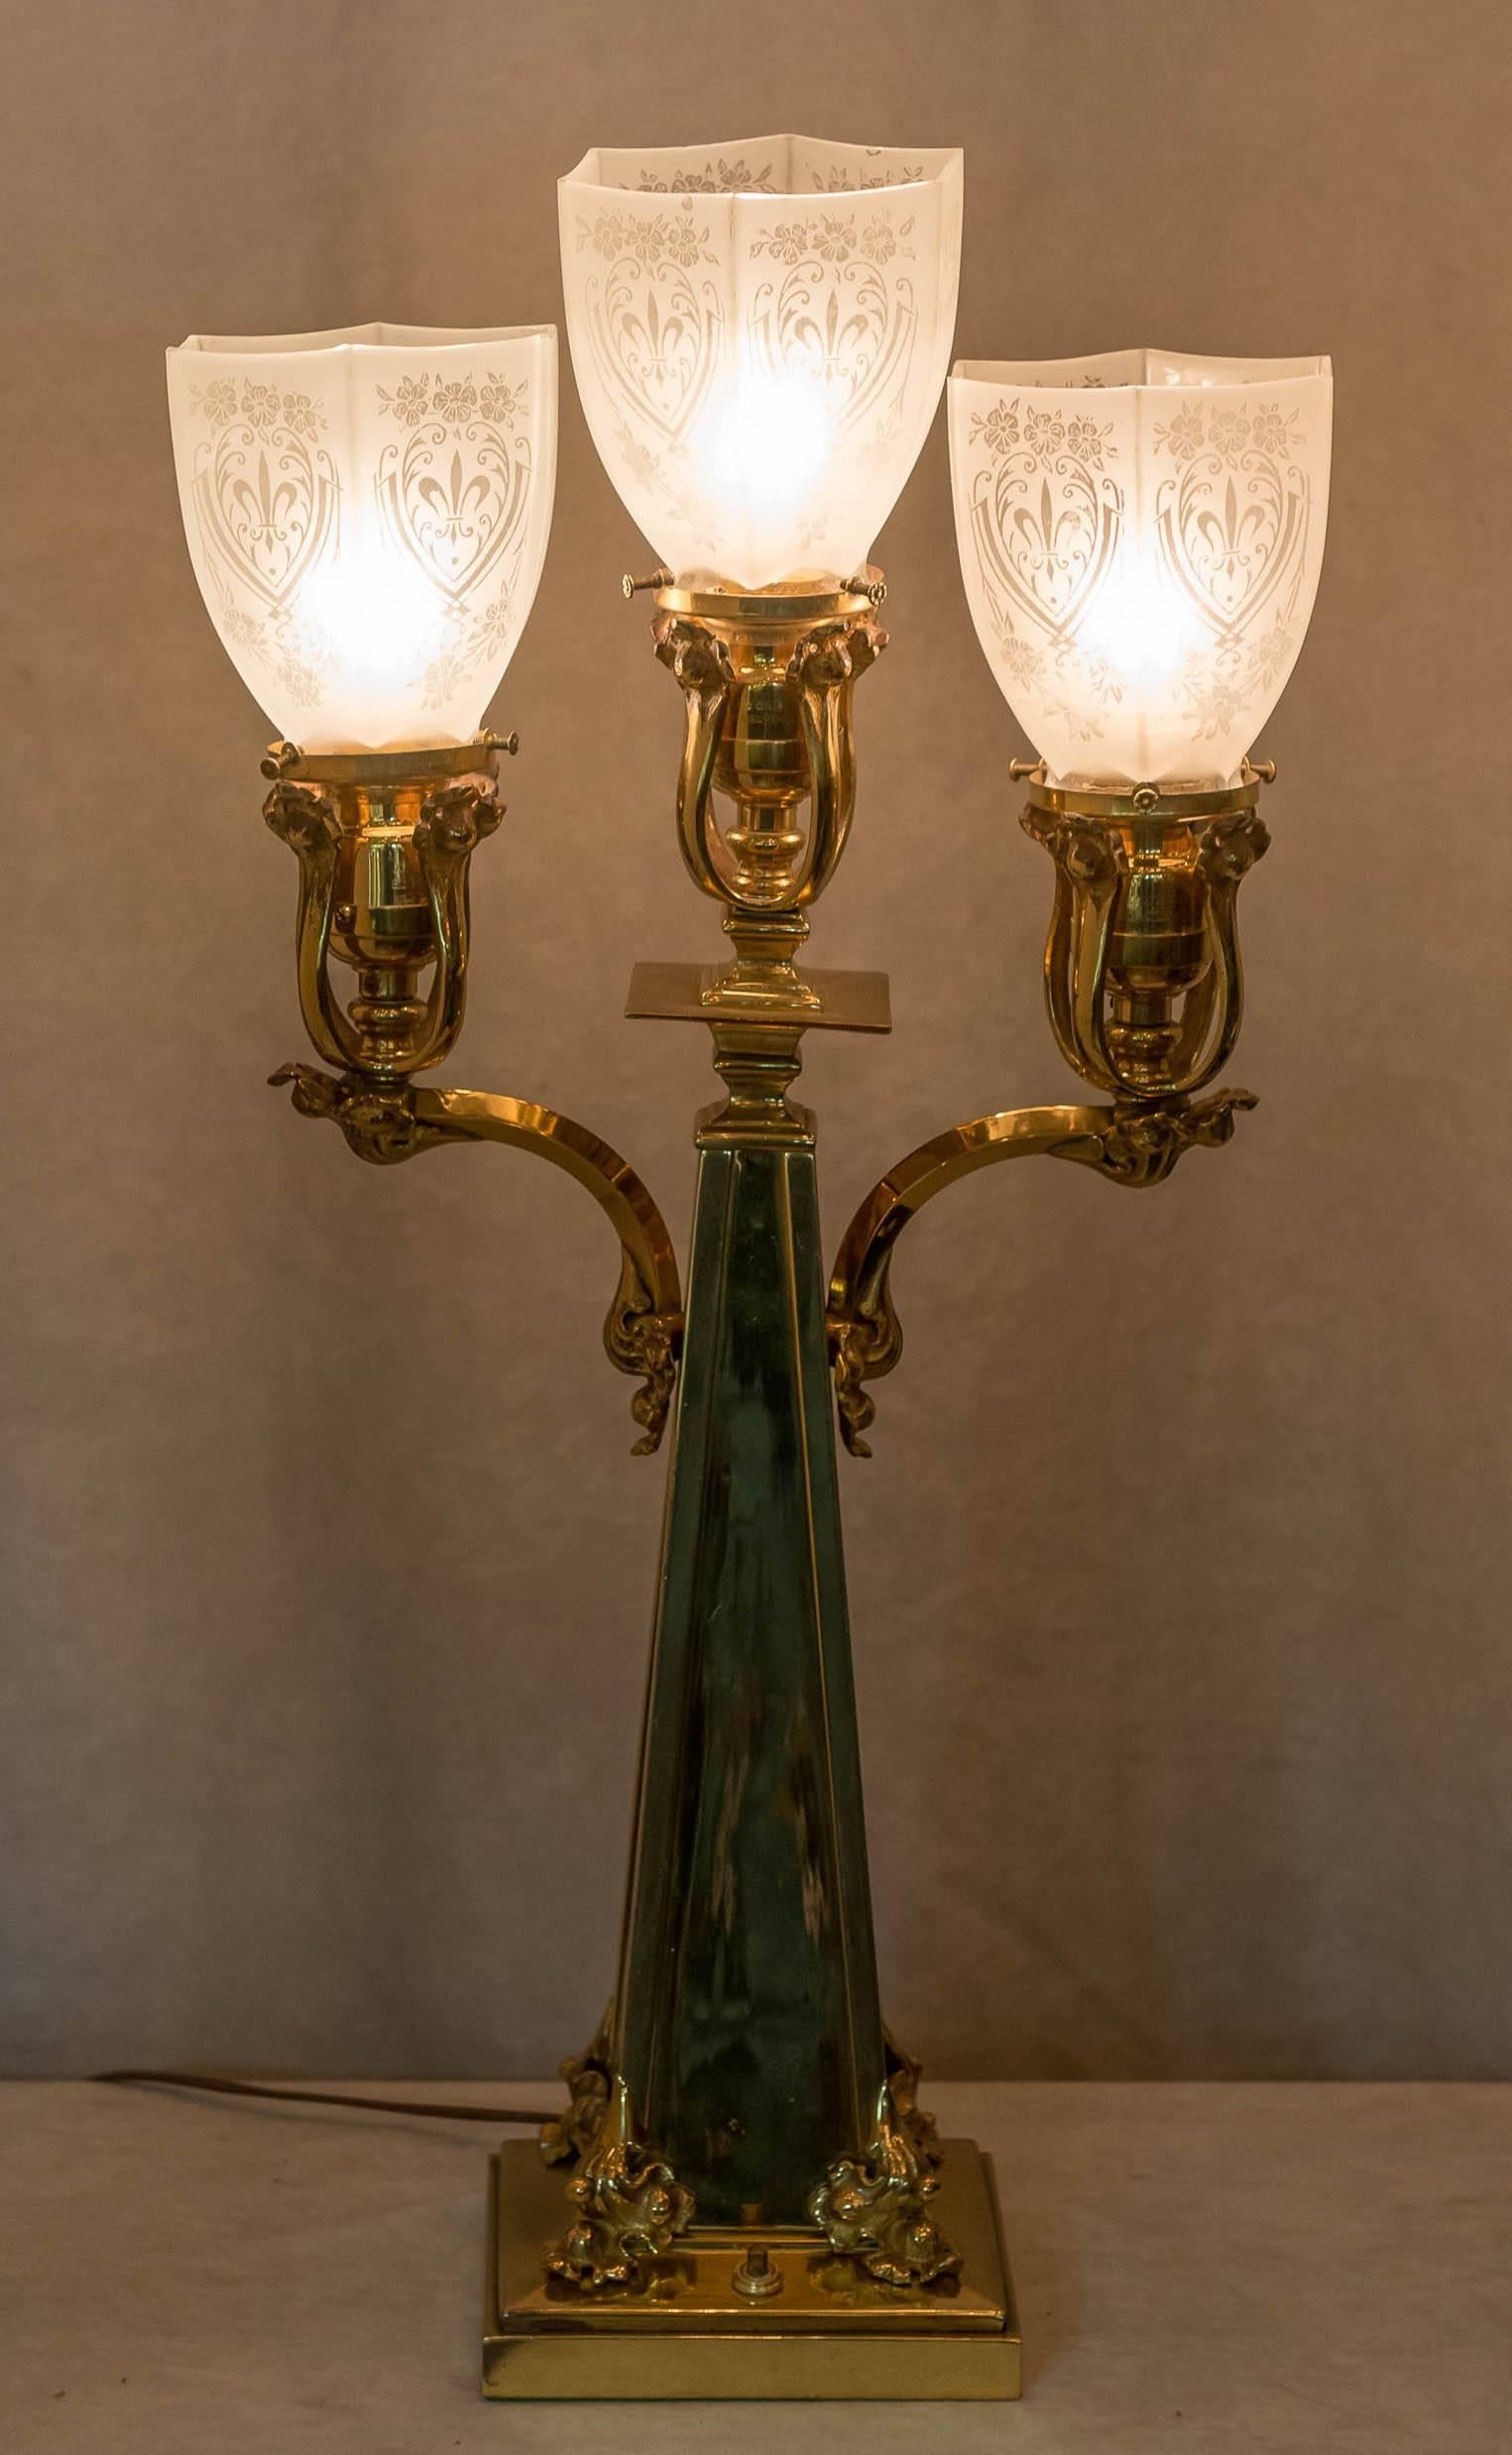 A most unusual three-arm table lamp. All polished bronze with beautiful cast bronze shade holders, and very attractive period stencil etched glass shades. A really handsome package that will decorate, and offer plenty of good light. We bought it